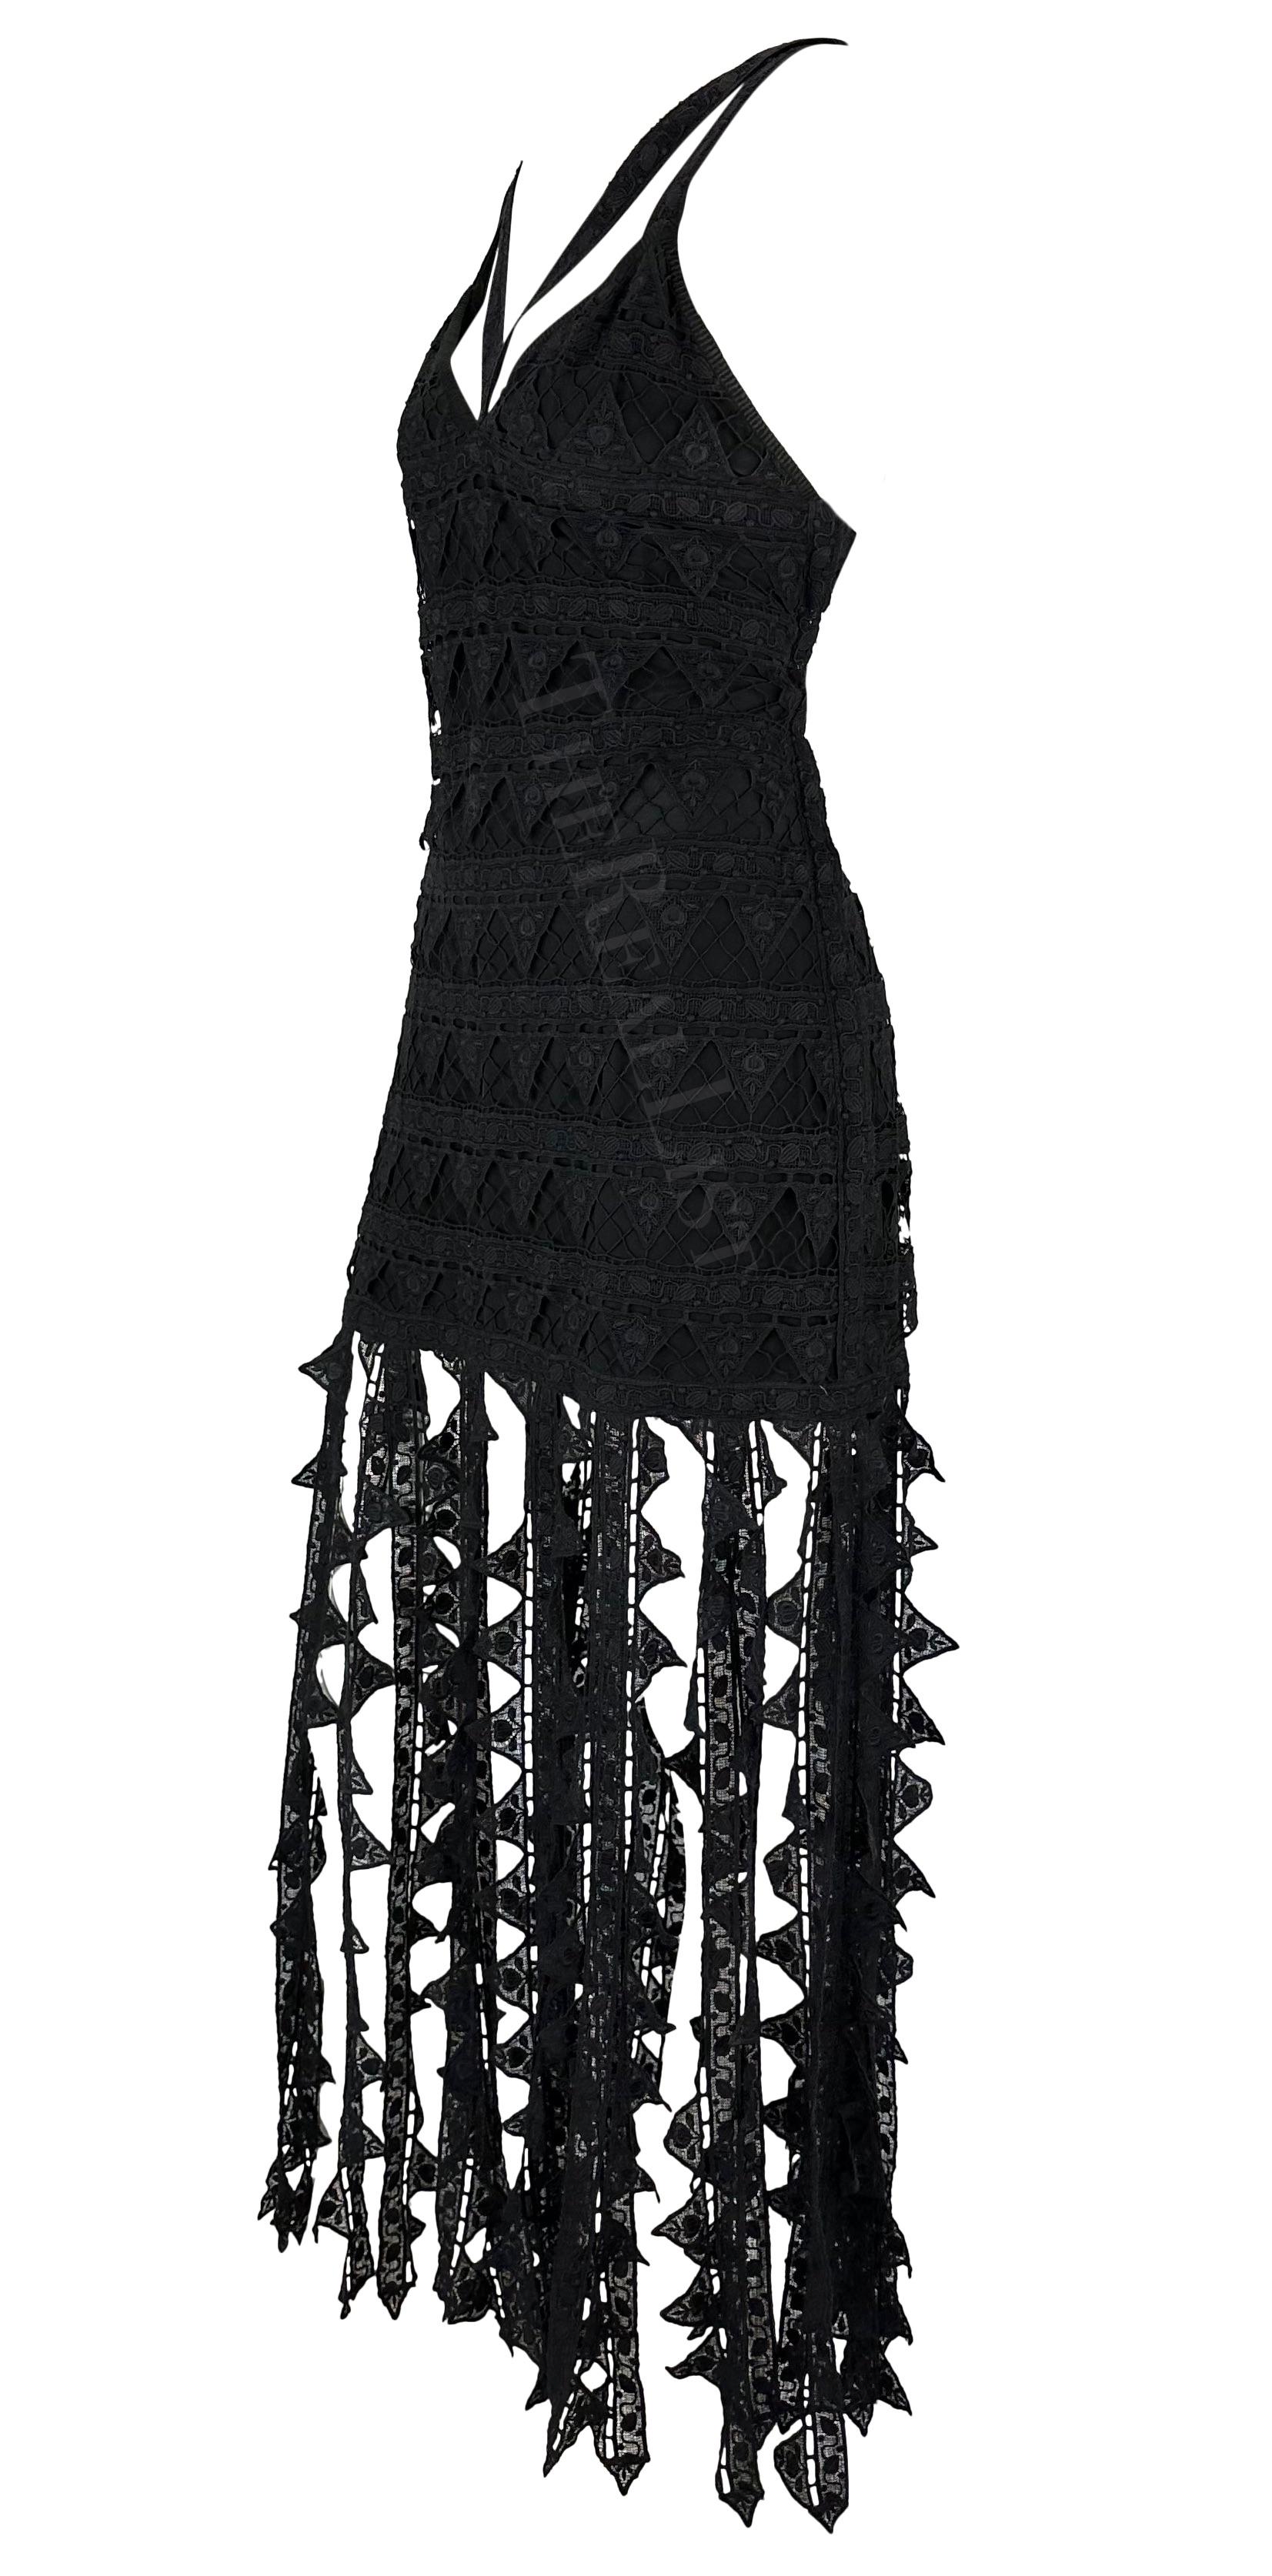 S/S 1993 Chloé by Karl Lagerfeld Runway Black Floral Triangle Lace Dress For Sale 1